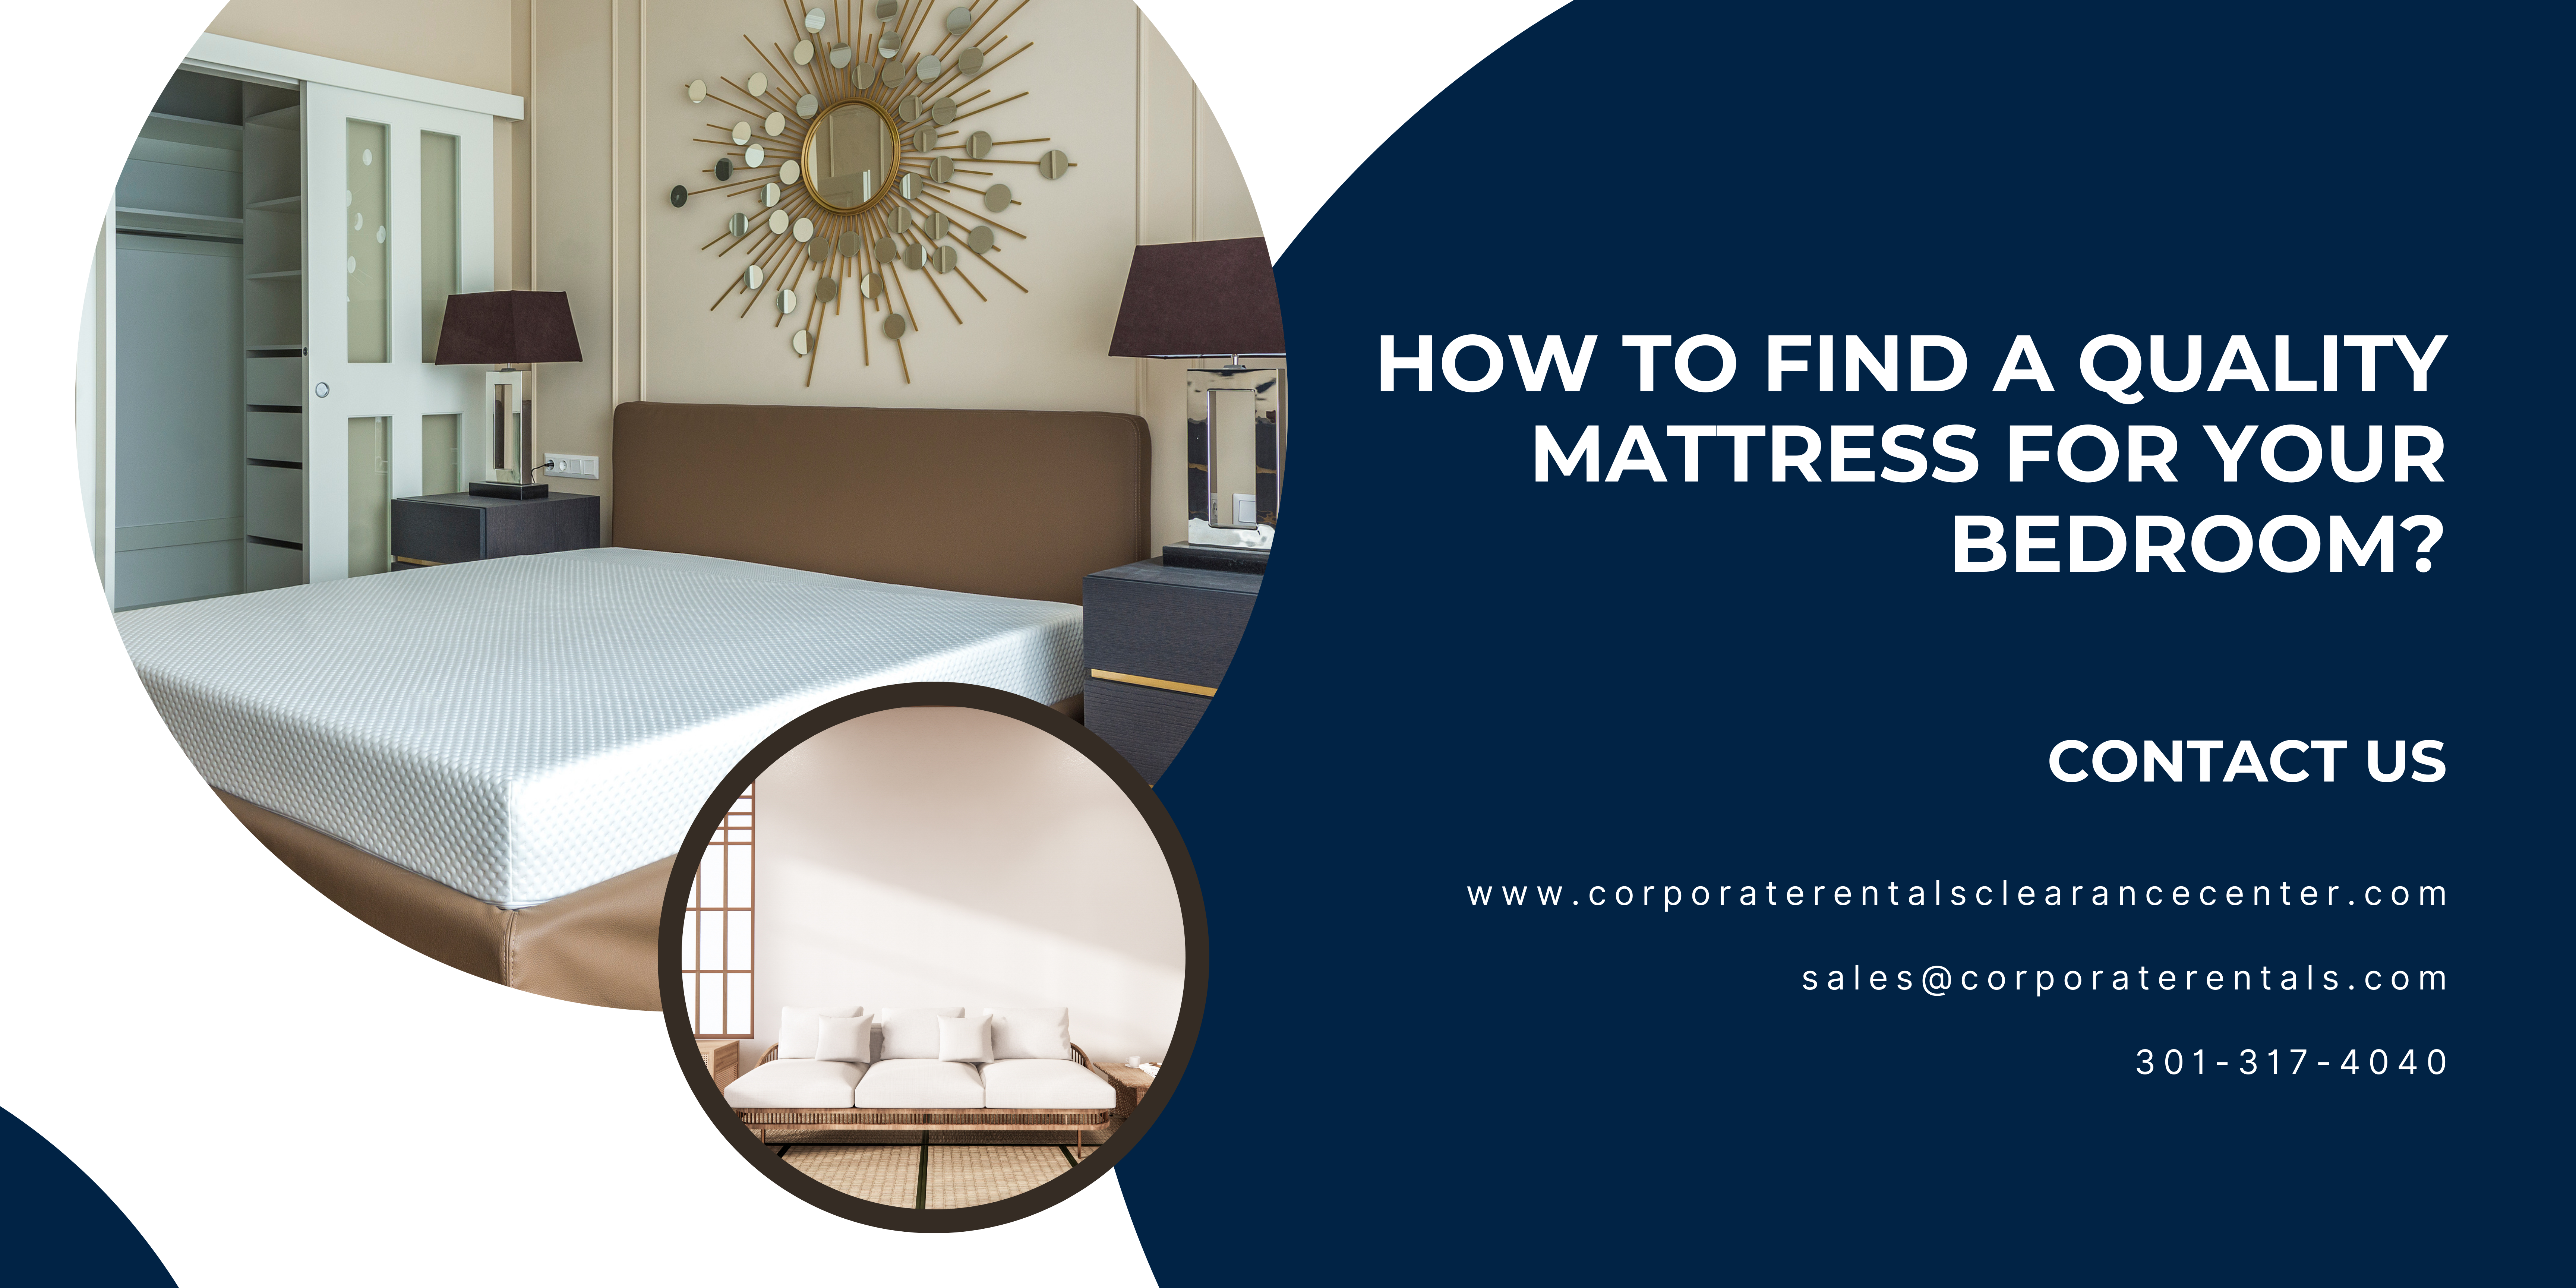 How to Find a Quality Mattress for Your Bedroom?